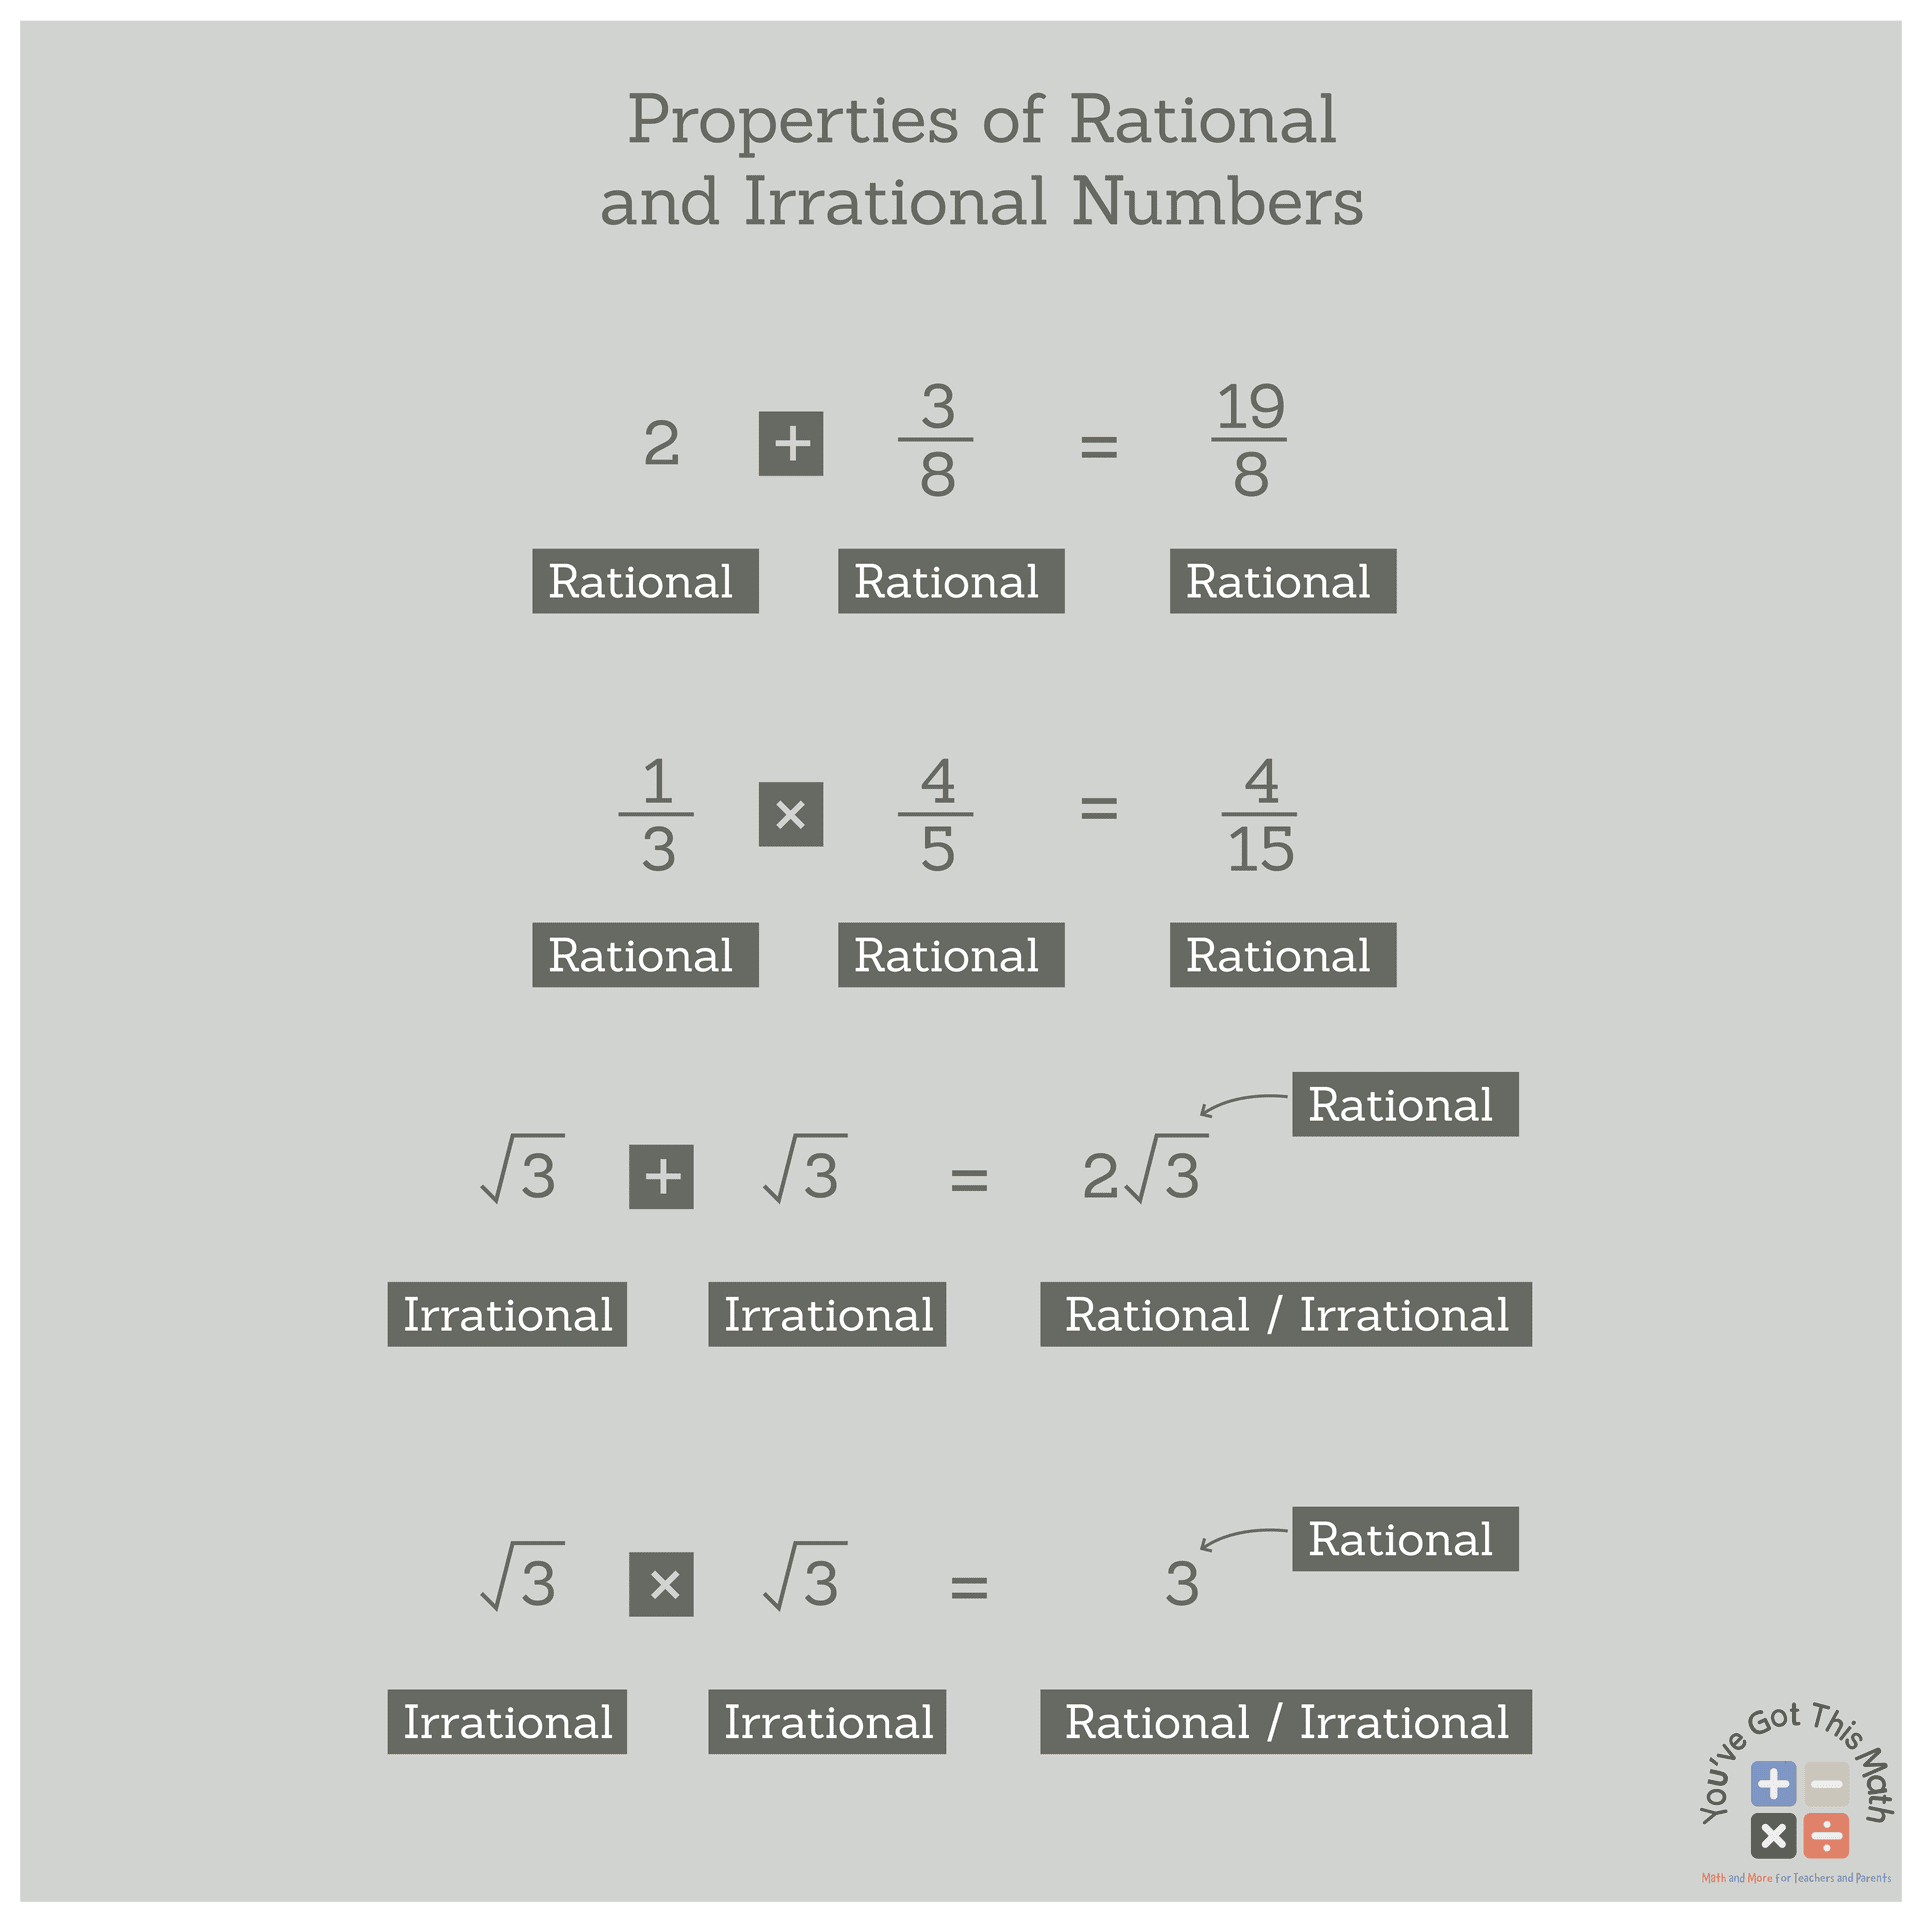 Properties of Rational and Irrational Numbers